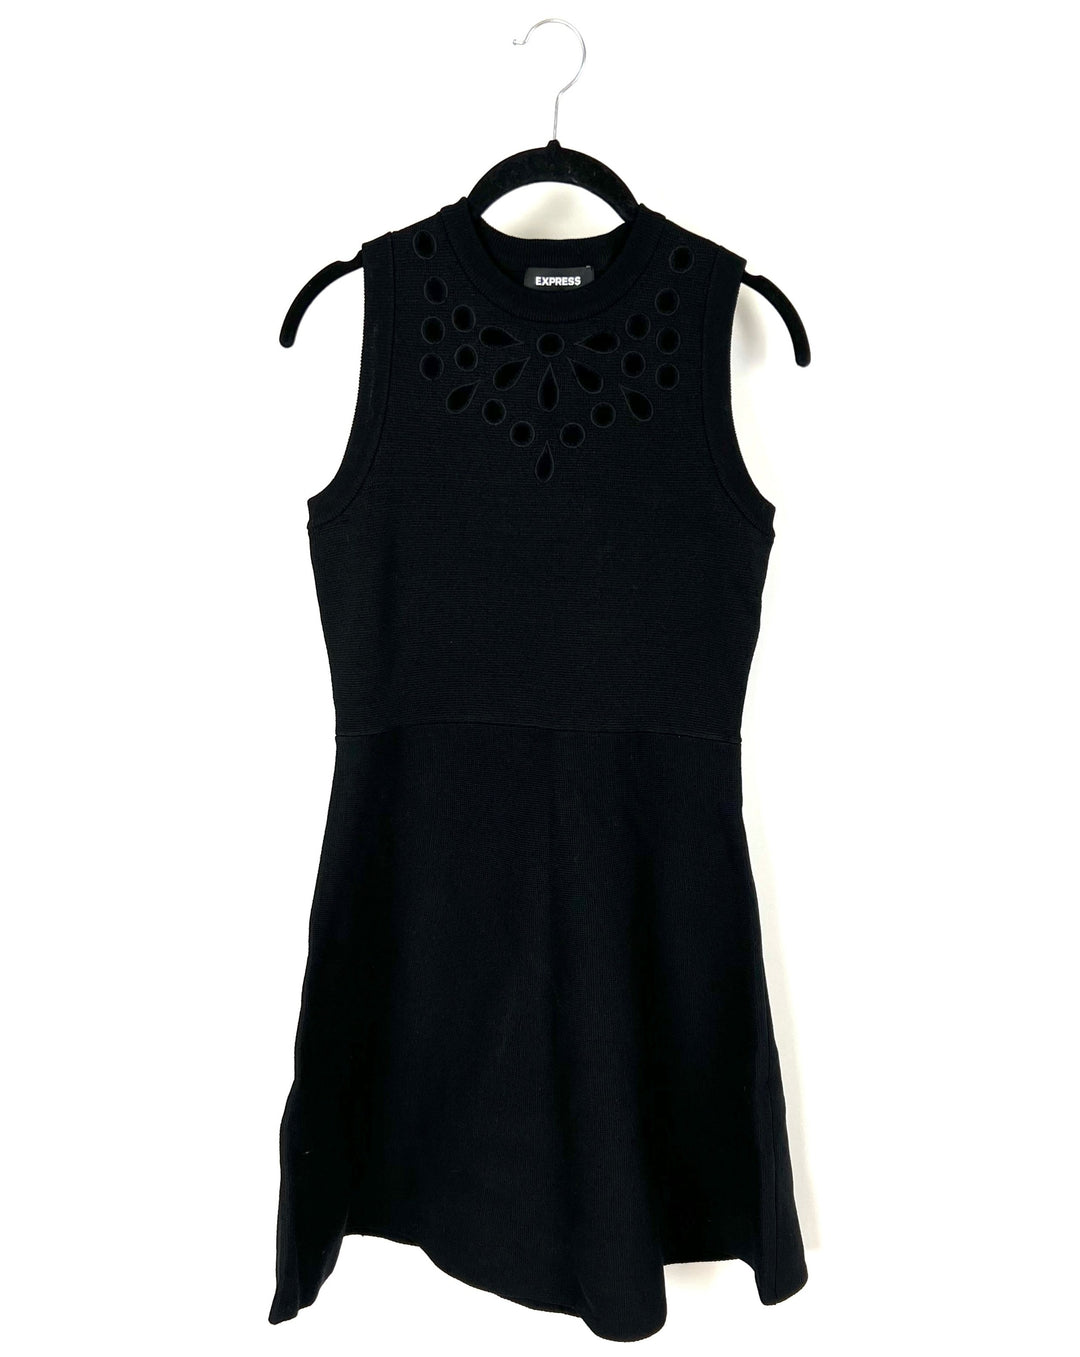 Black Fit and Flare Dress - Small